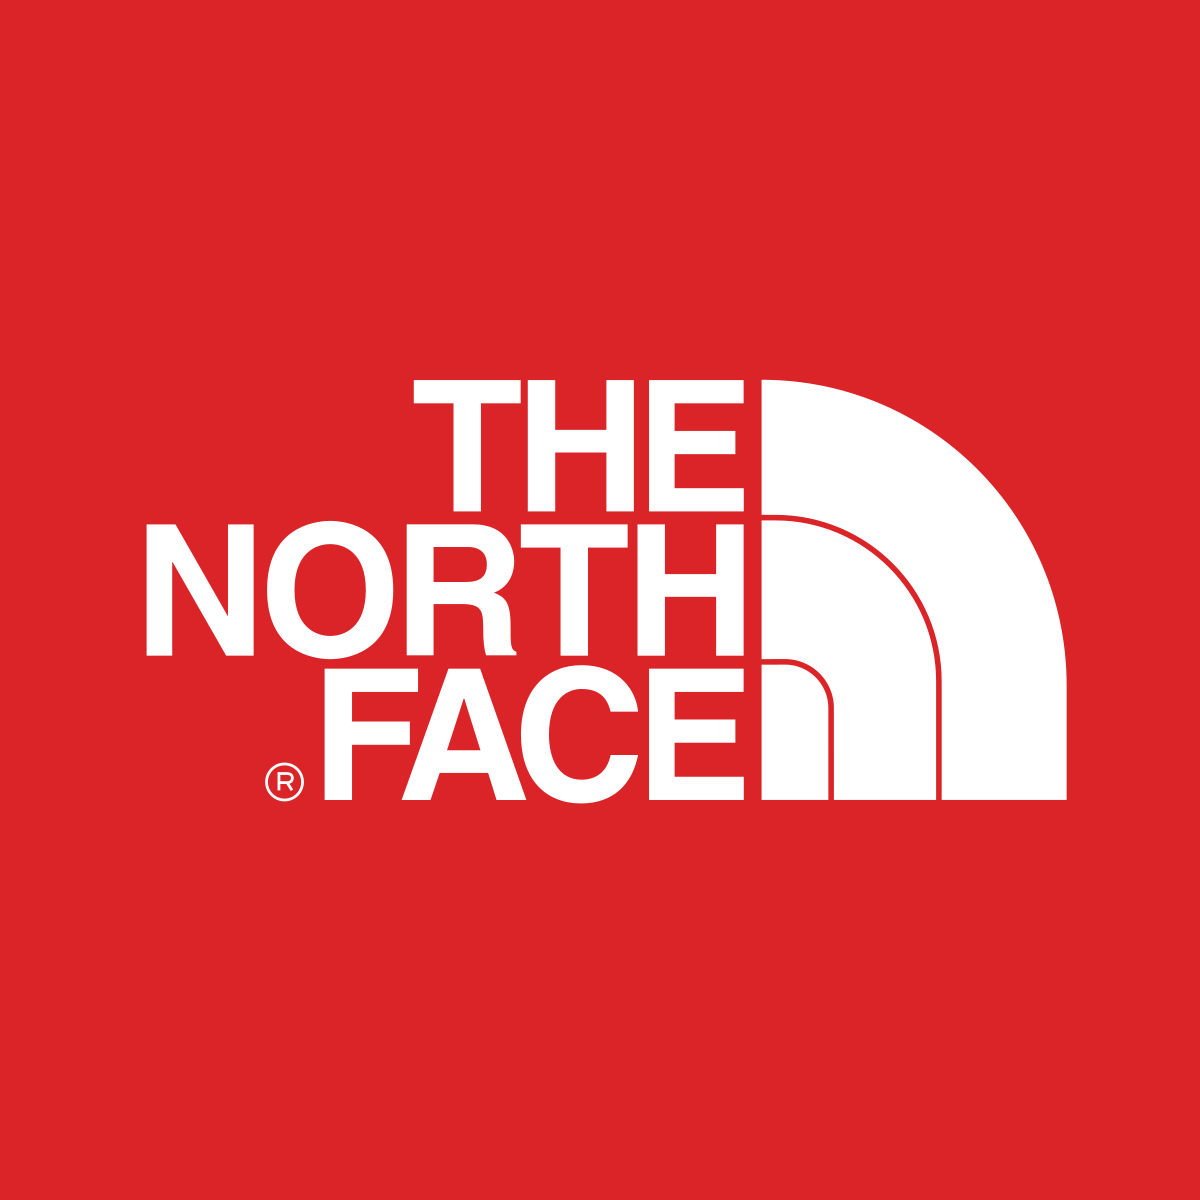 geographic segmentation in marketing: real life example of The North Face